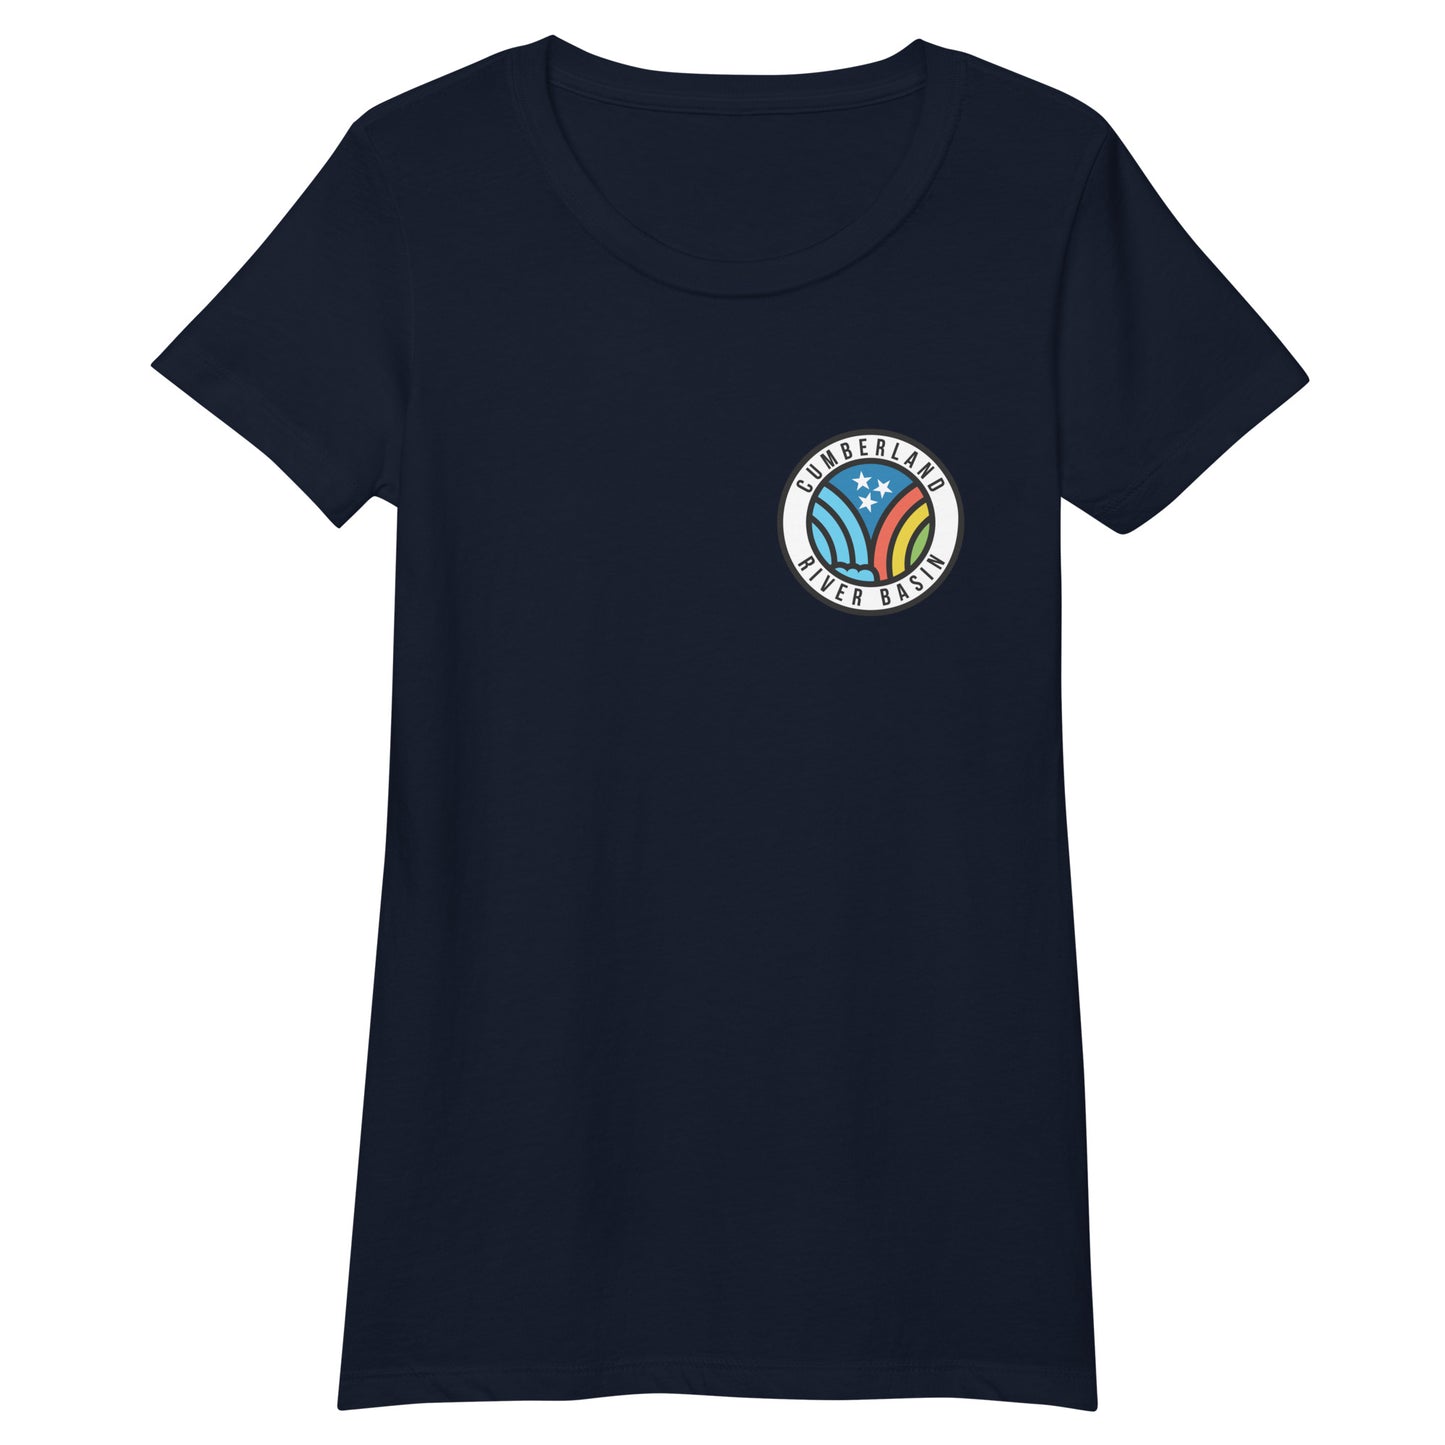 Basin Women’s Fitted T-Shirt